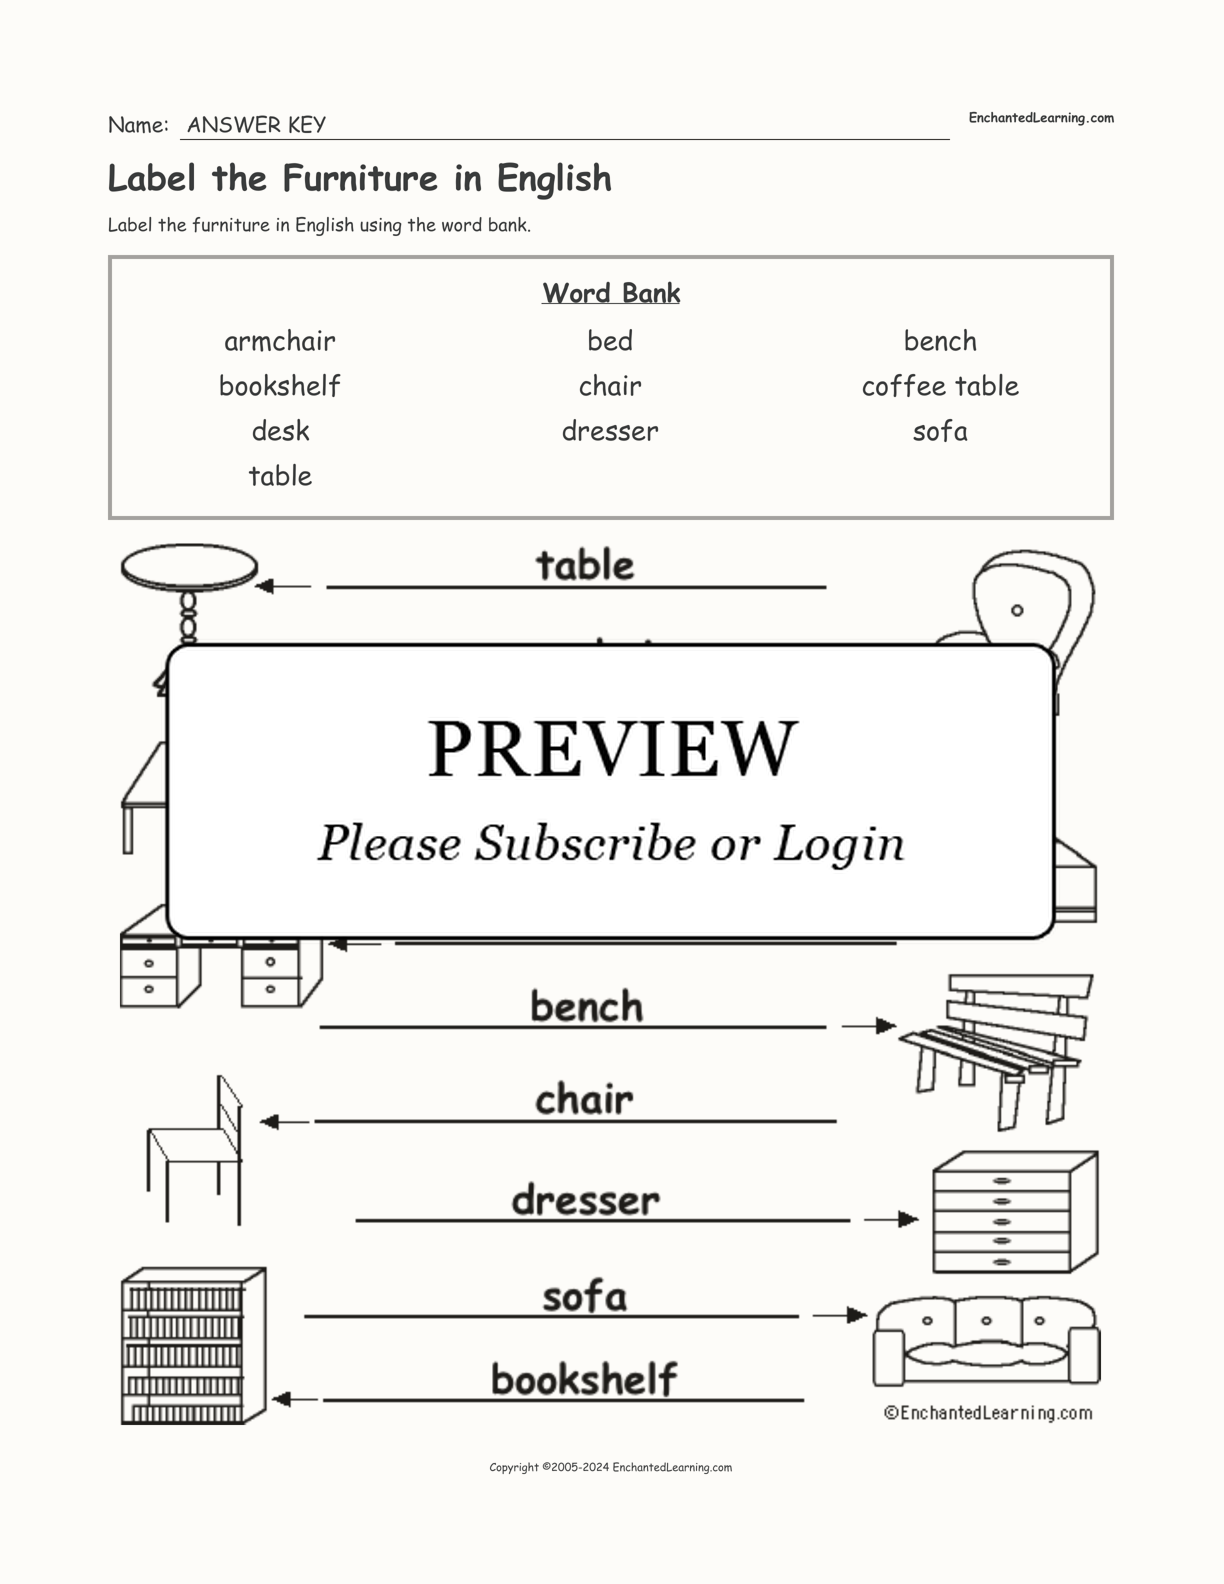 Label the Furniture in English interactive worksheet page 2